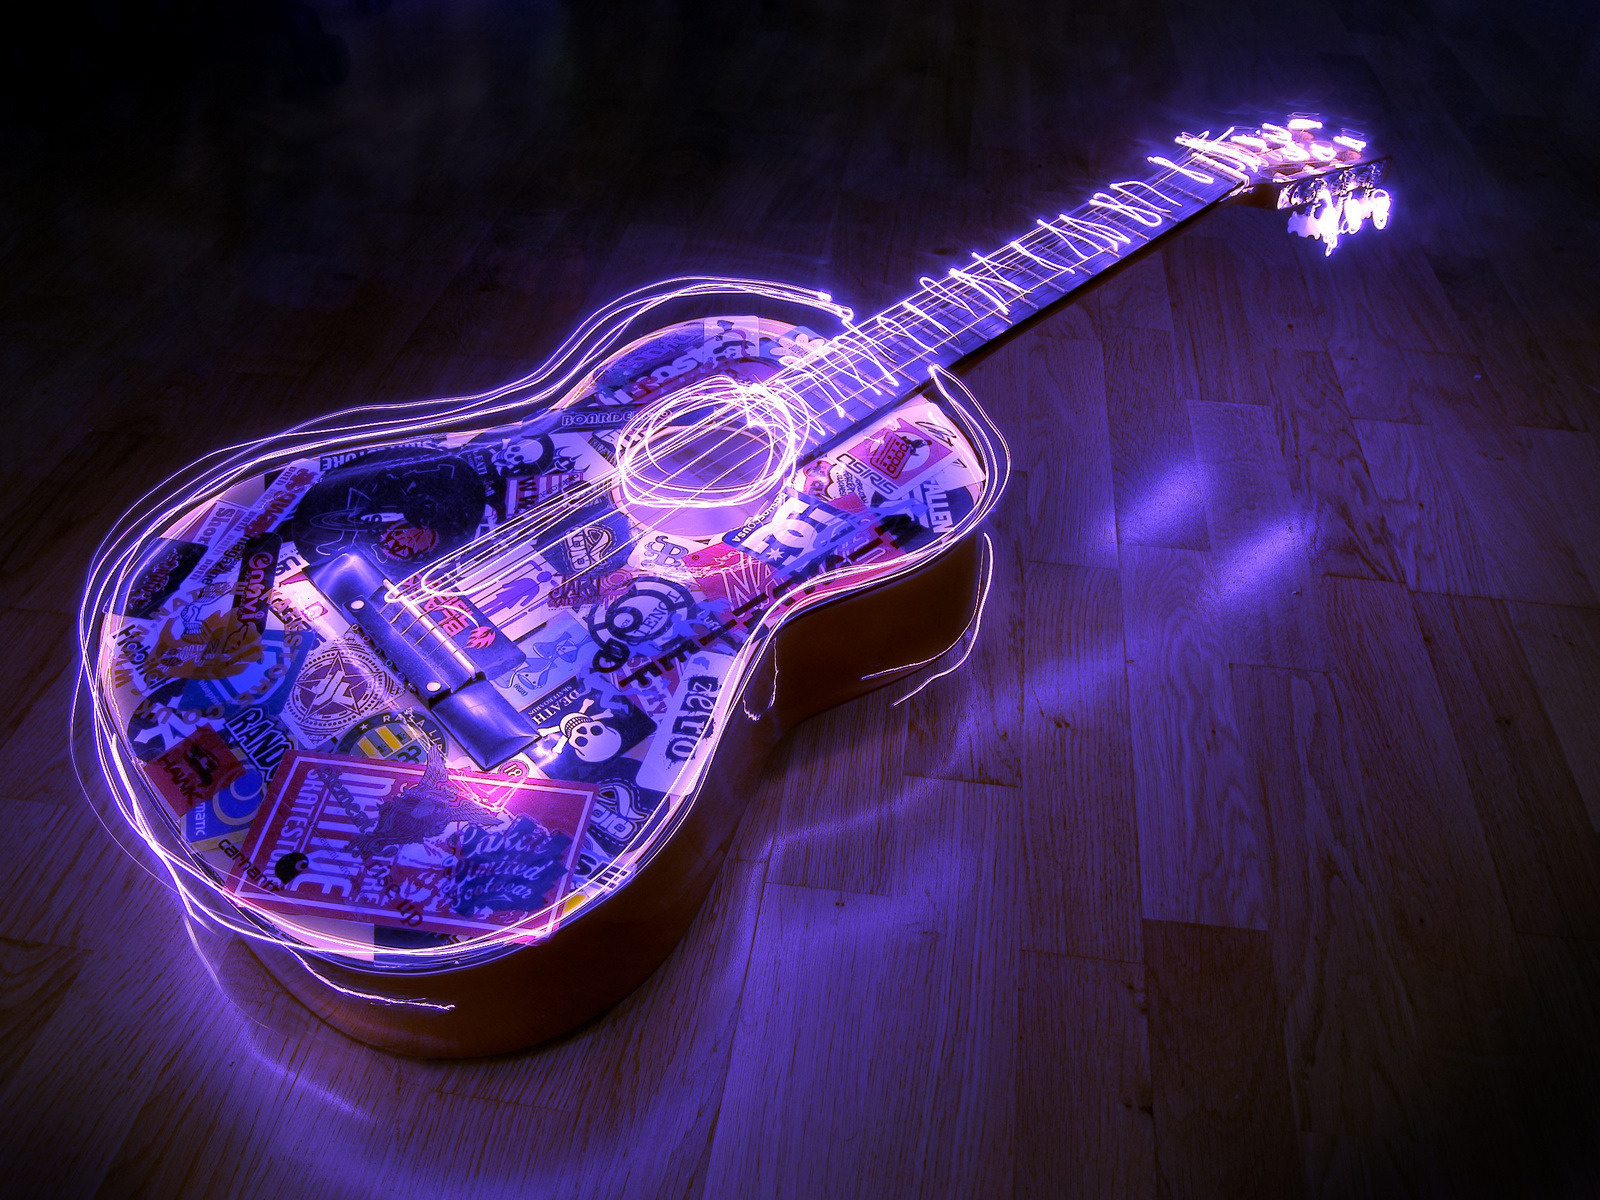 Cool Acoustic Guitar Desktop Background Share This